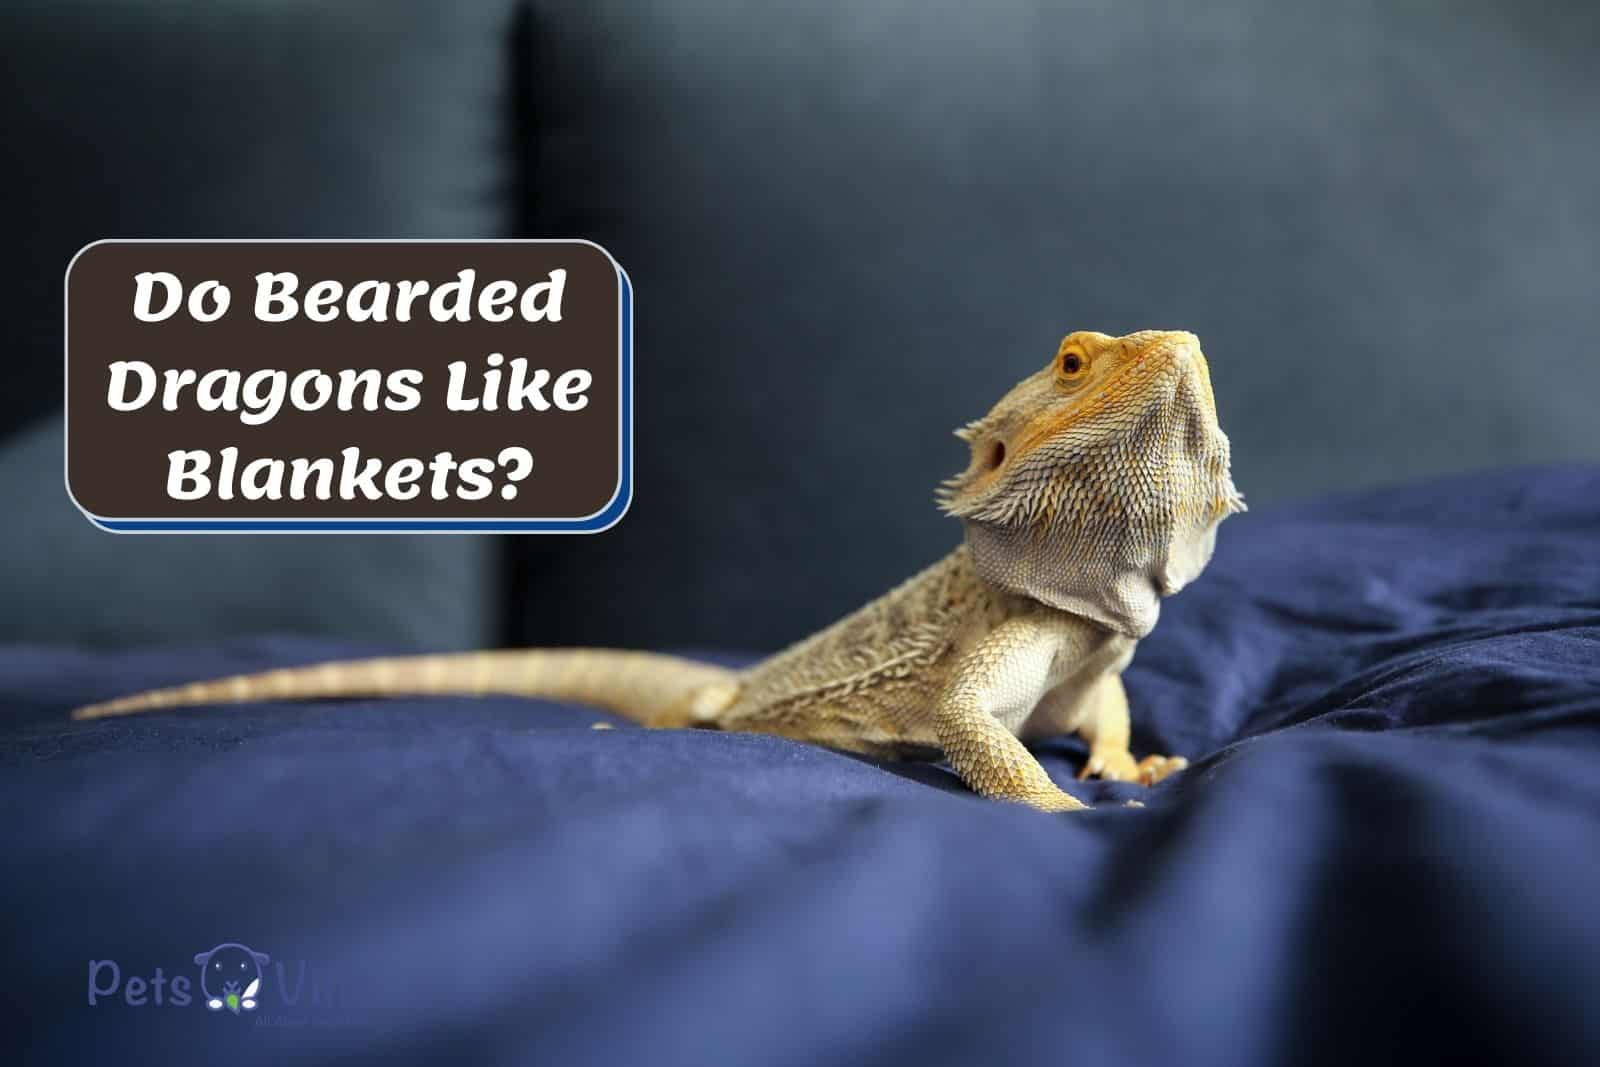 bearded dragon lying on the bed but Do Bearded Dragons Like Blankets?